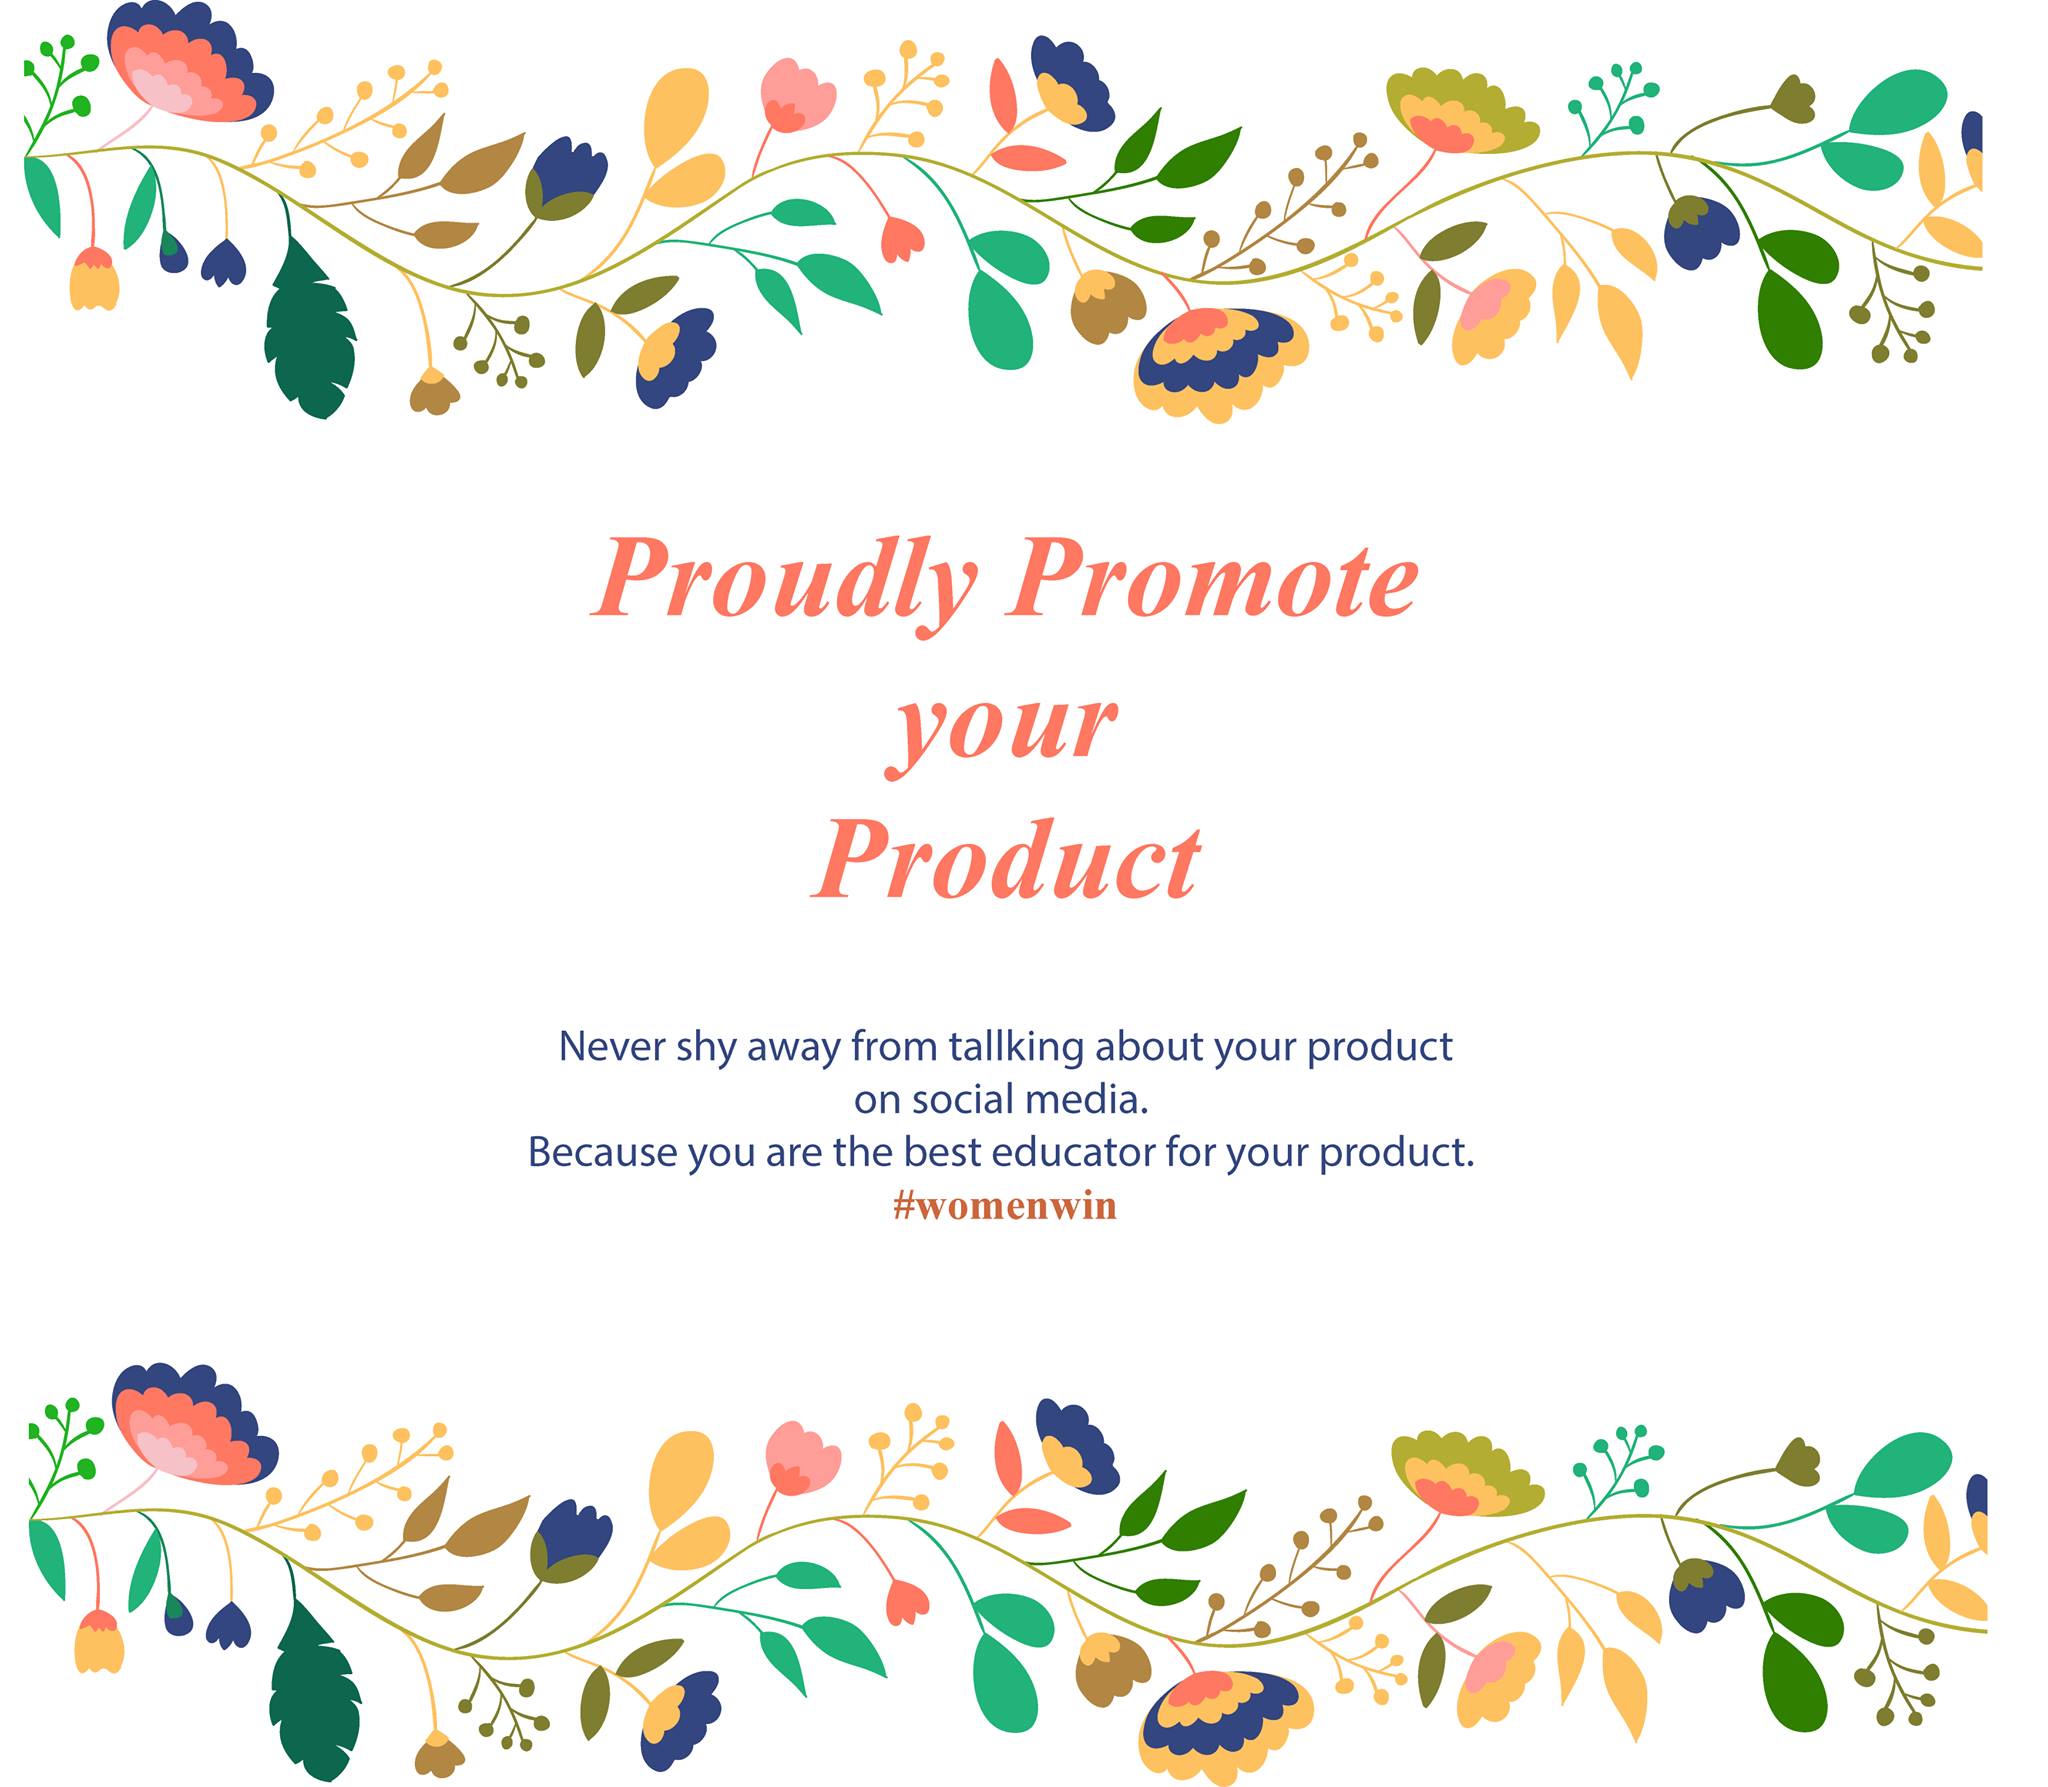 Proudly promote your product